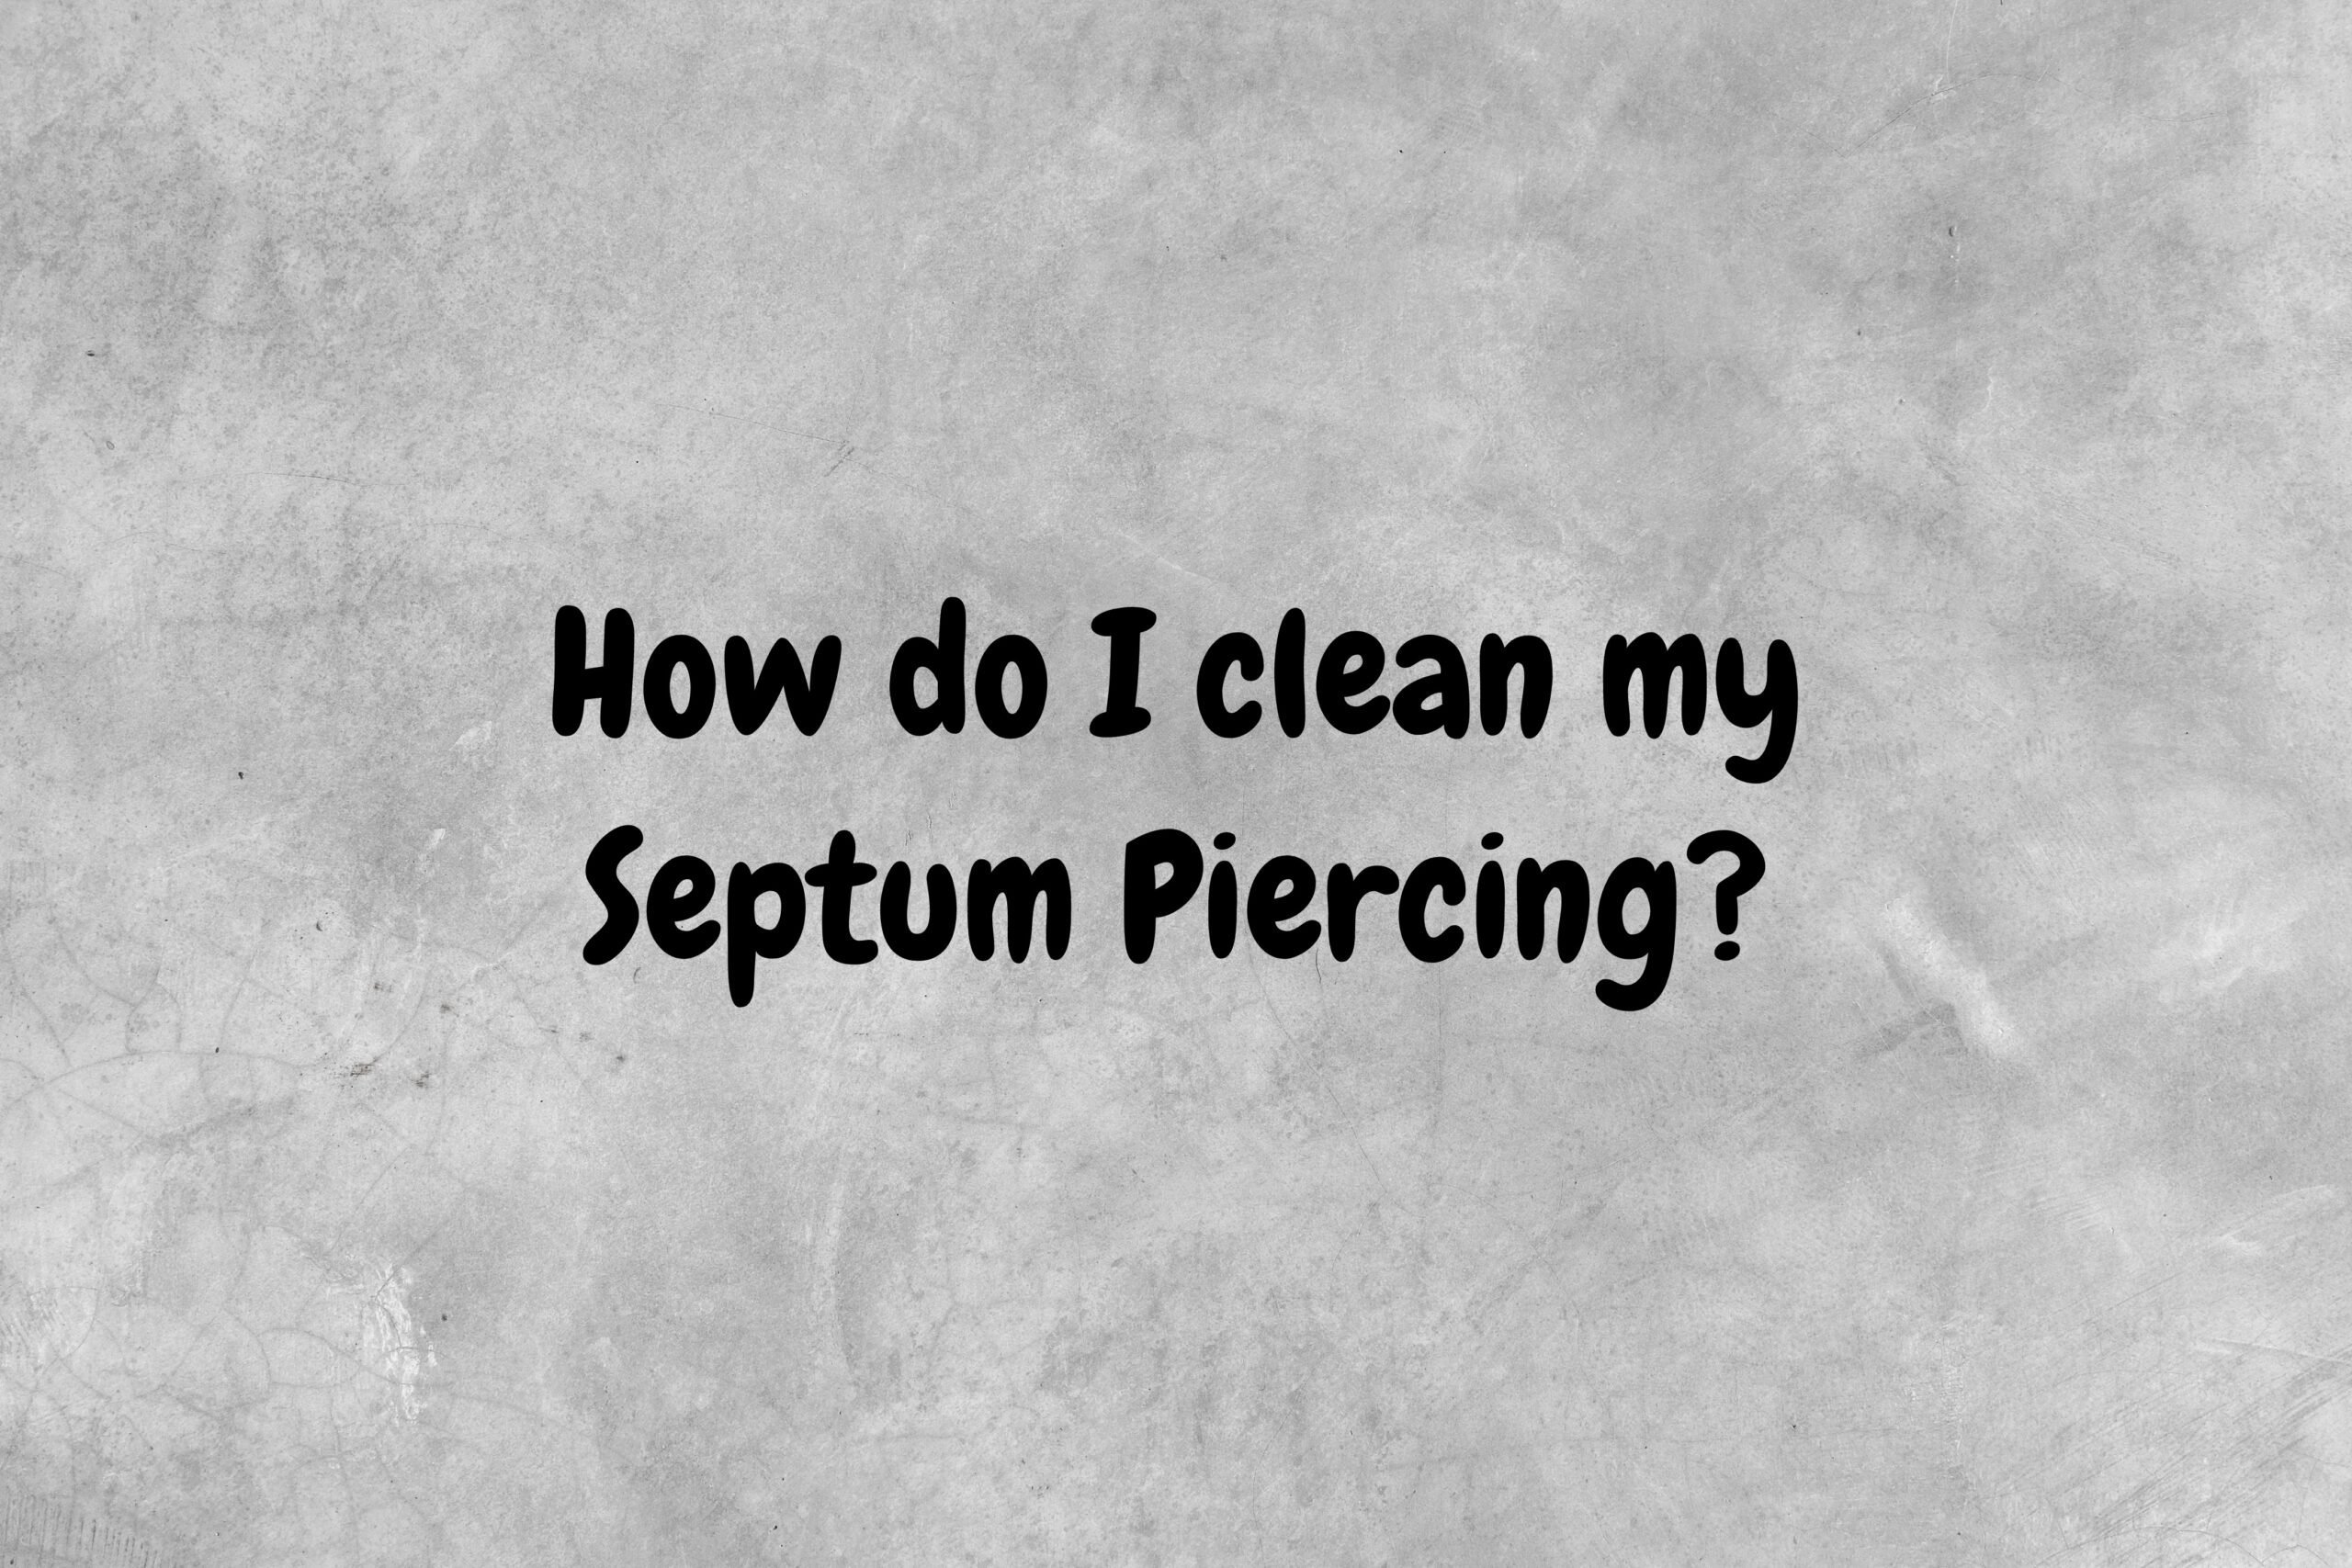 An image with a gray background and black text asking the question, "How do I clean my septum piercing?"